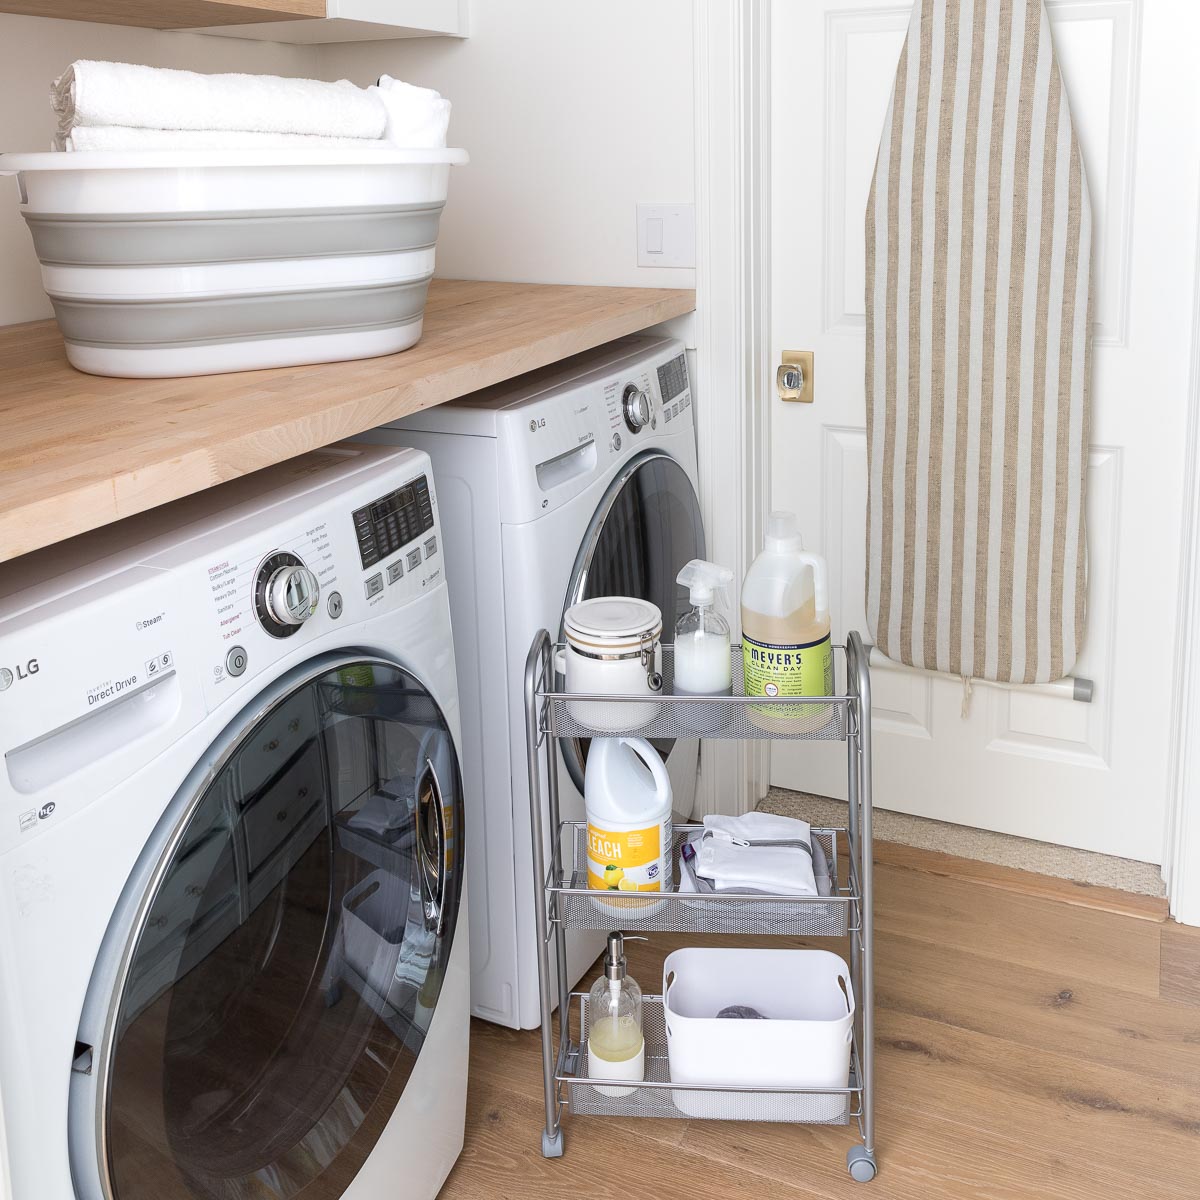 Laundry Room Storage Ideas: 6 Ways To Make The Most Of Your Space! - Driven  By Decor